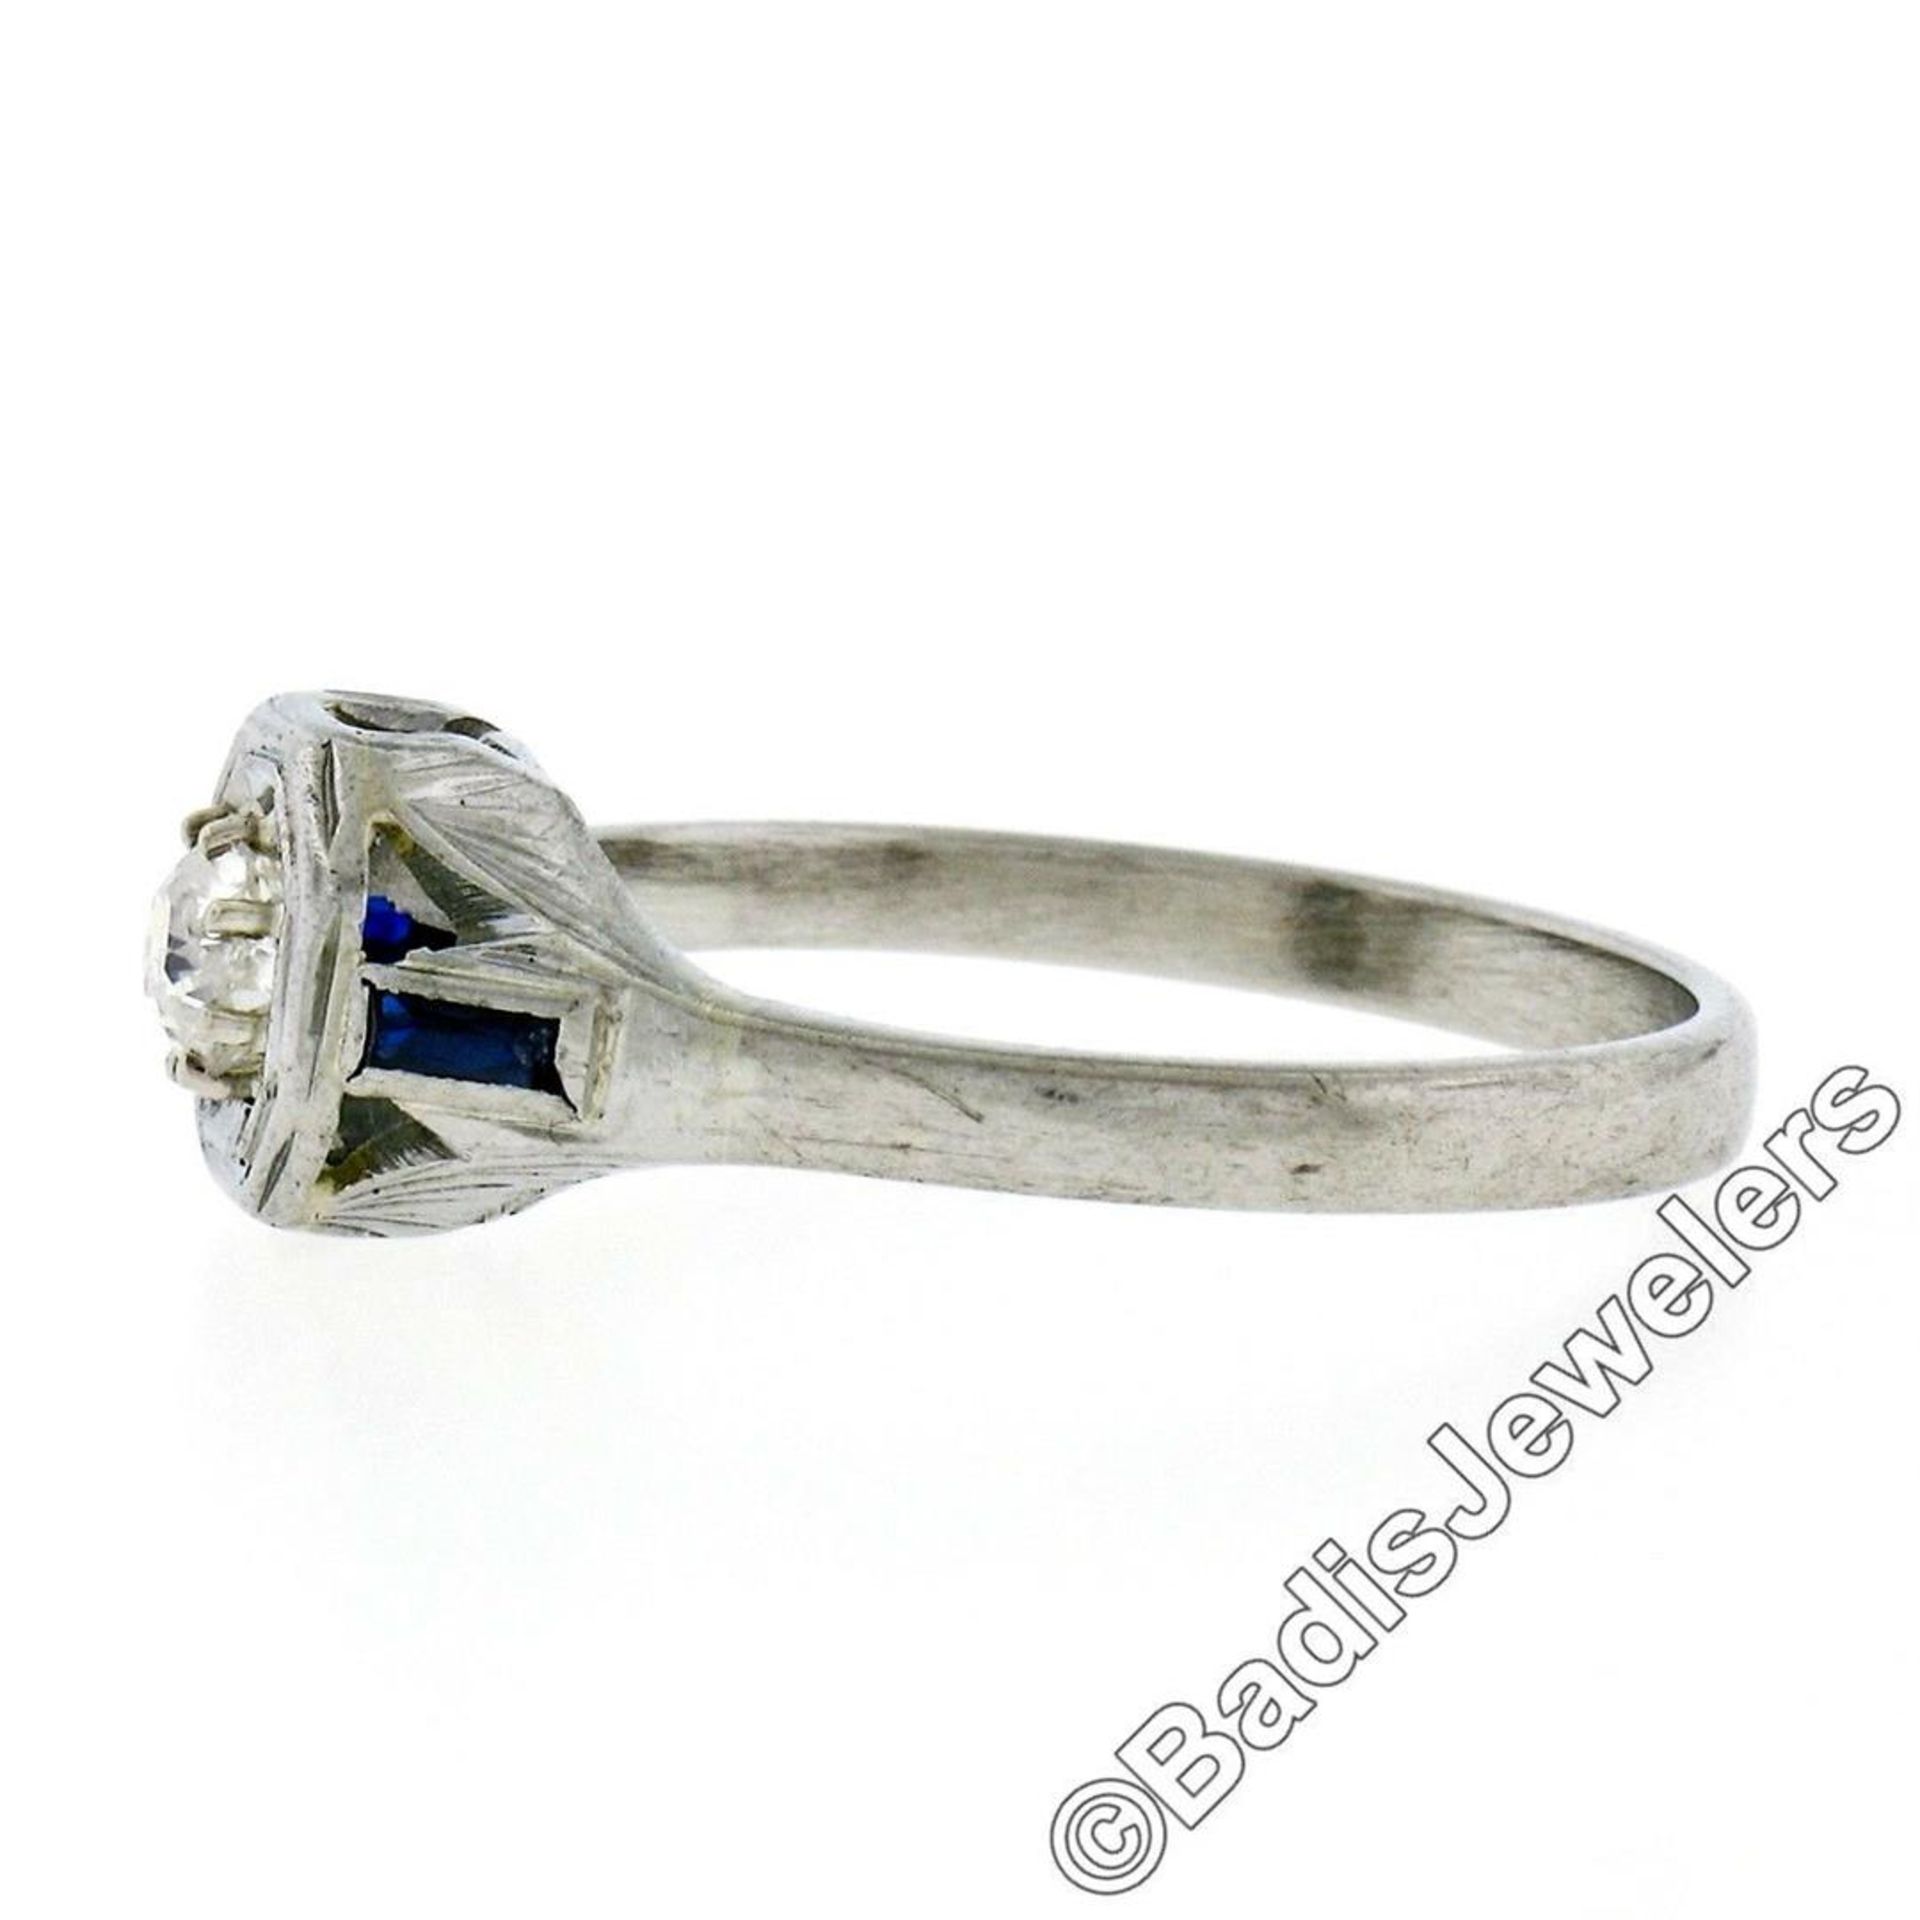 Art Deco 14kt White Gold 0.28ct Diamond Solitaire Engagement Ring - Image 6 of 7